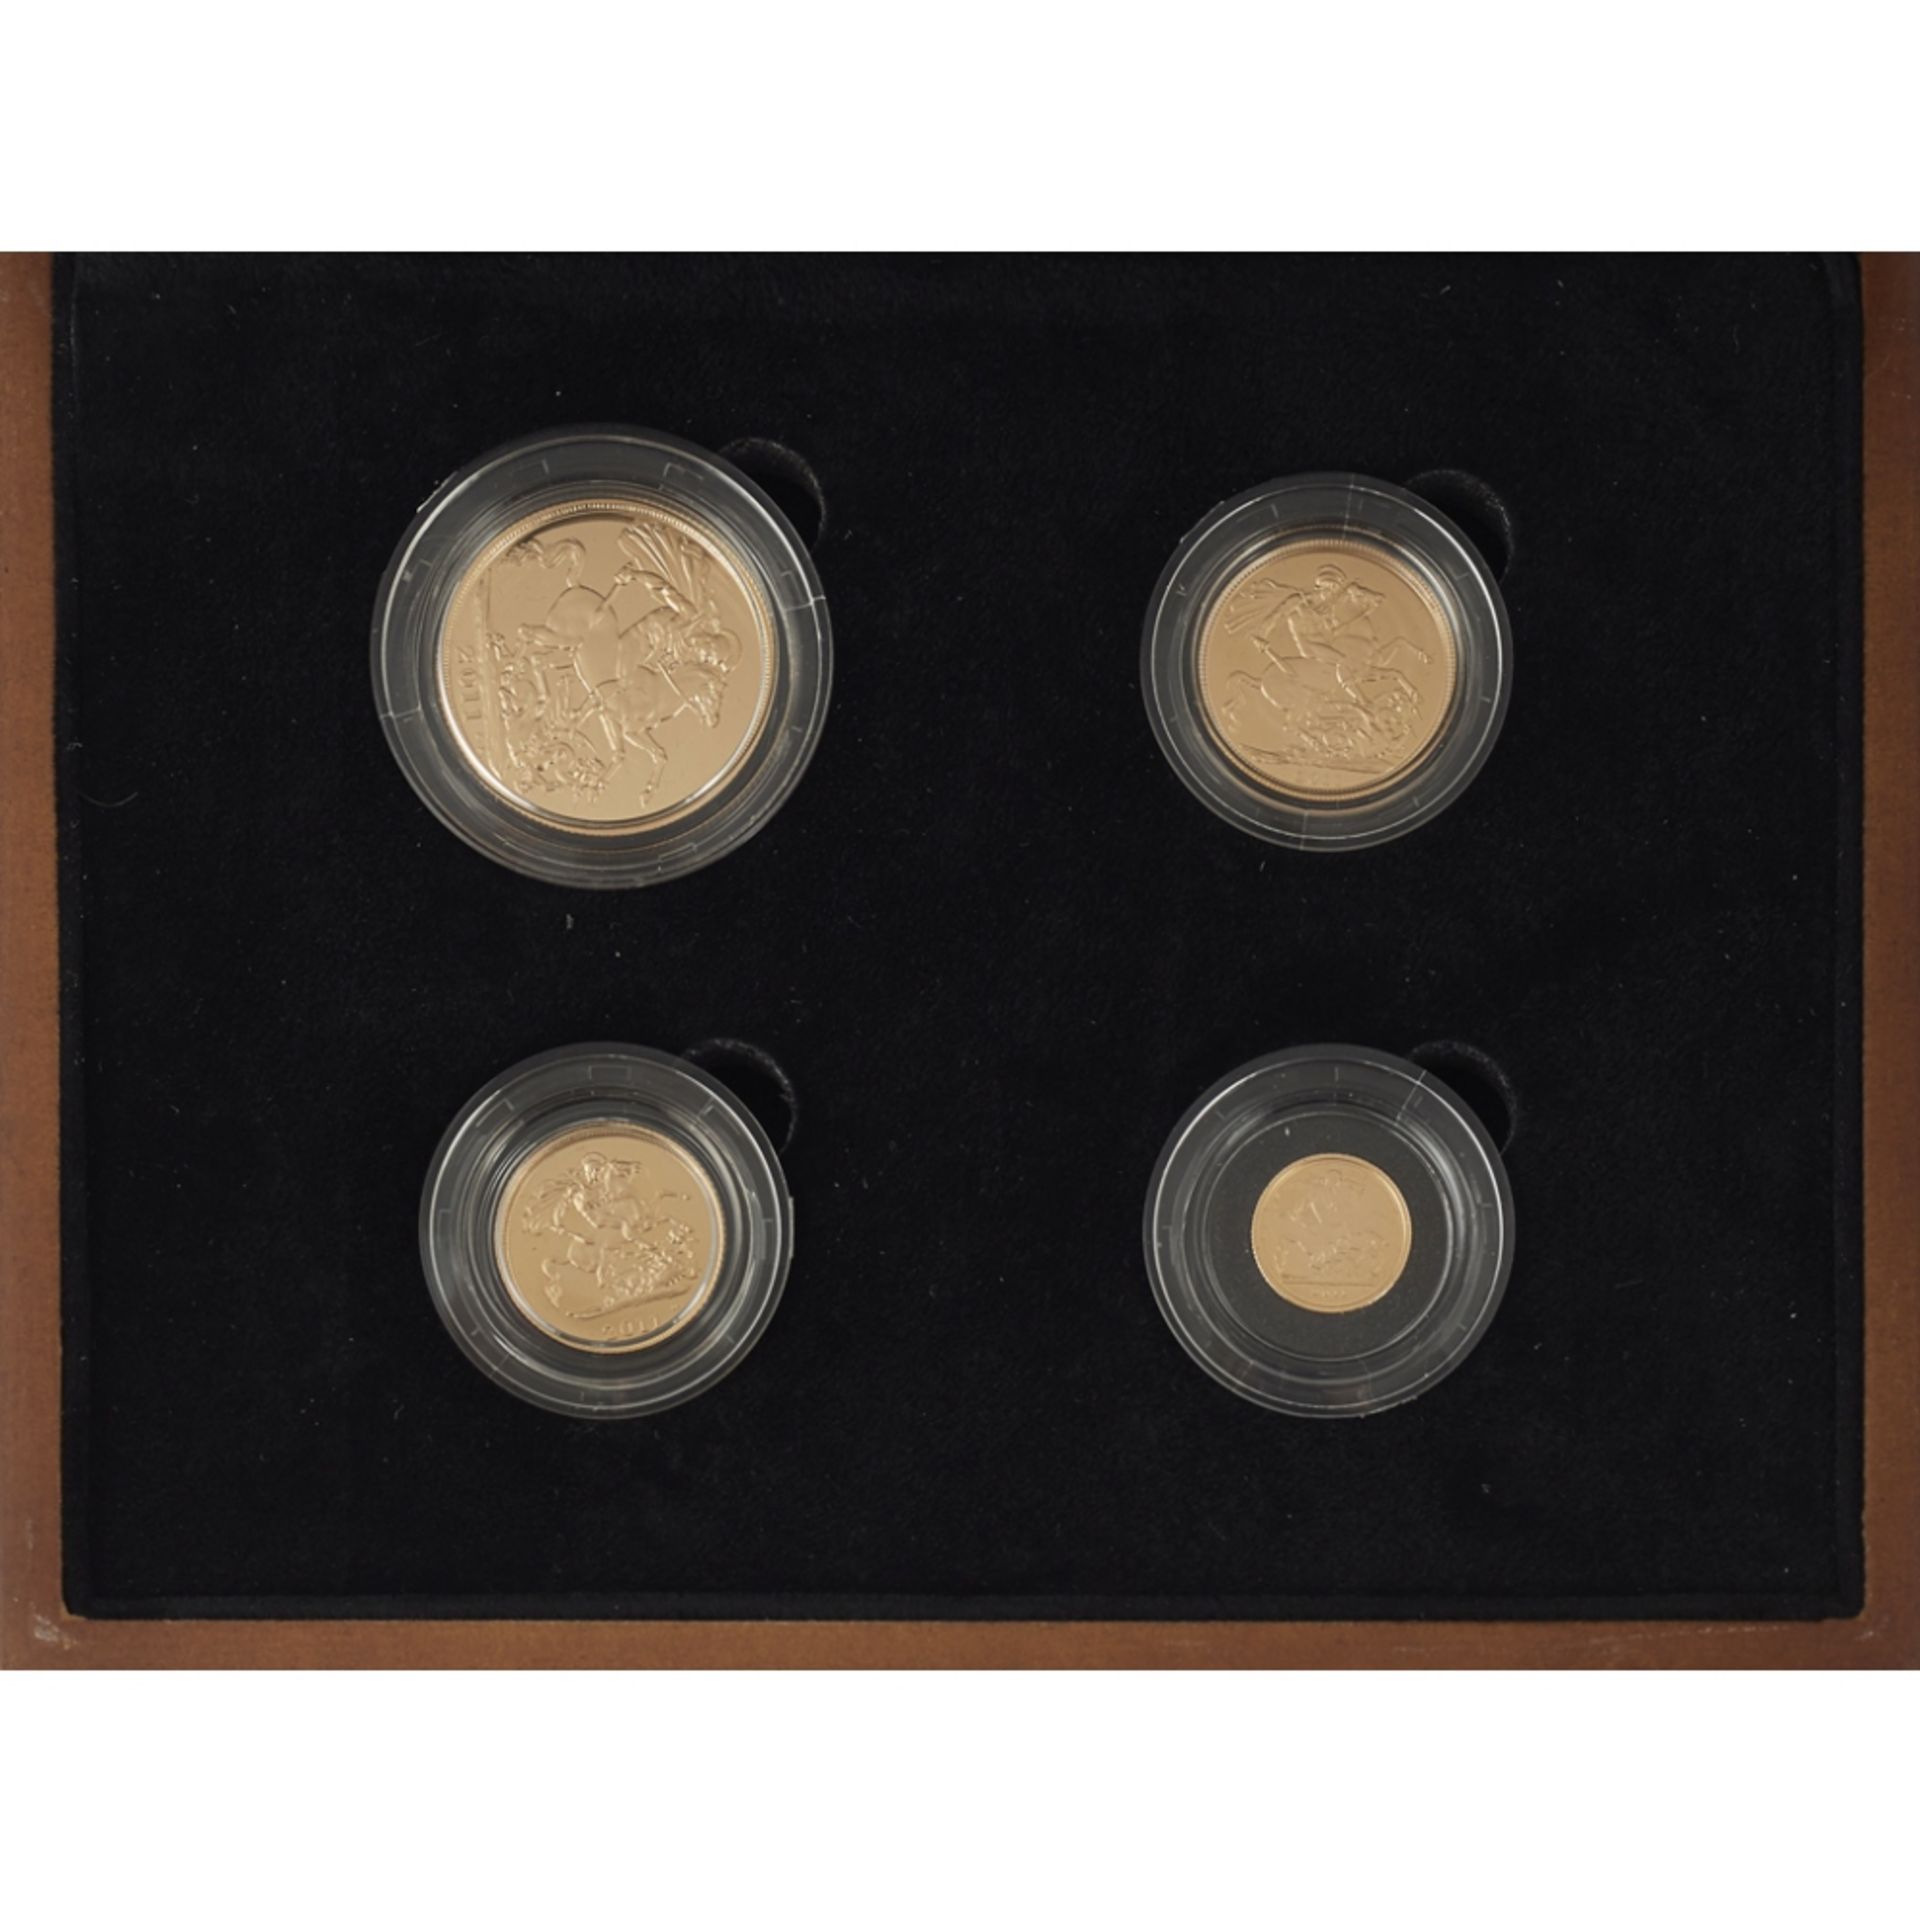 GB -A 2011 proof gold sovereign setcased and with booklet, comprising; double sovereign,